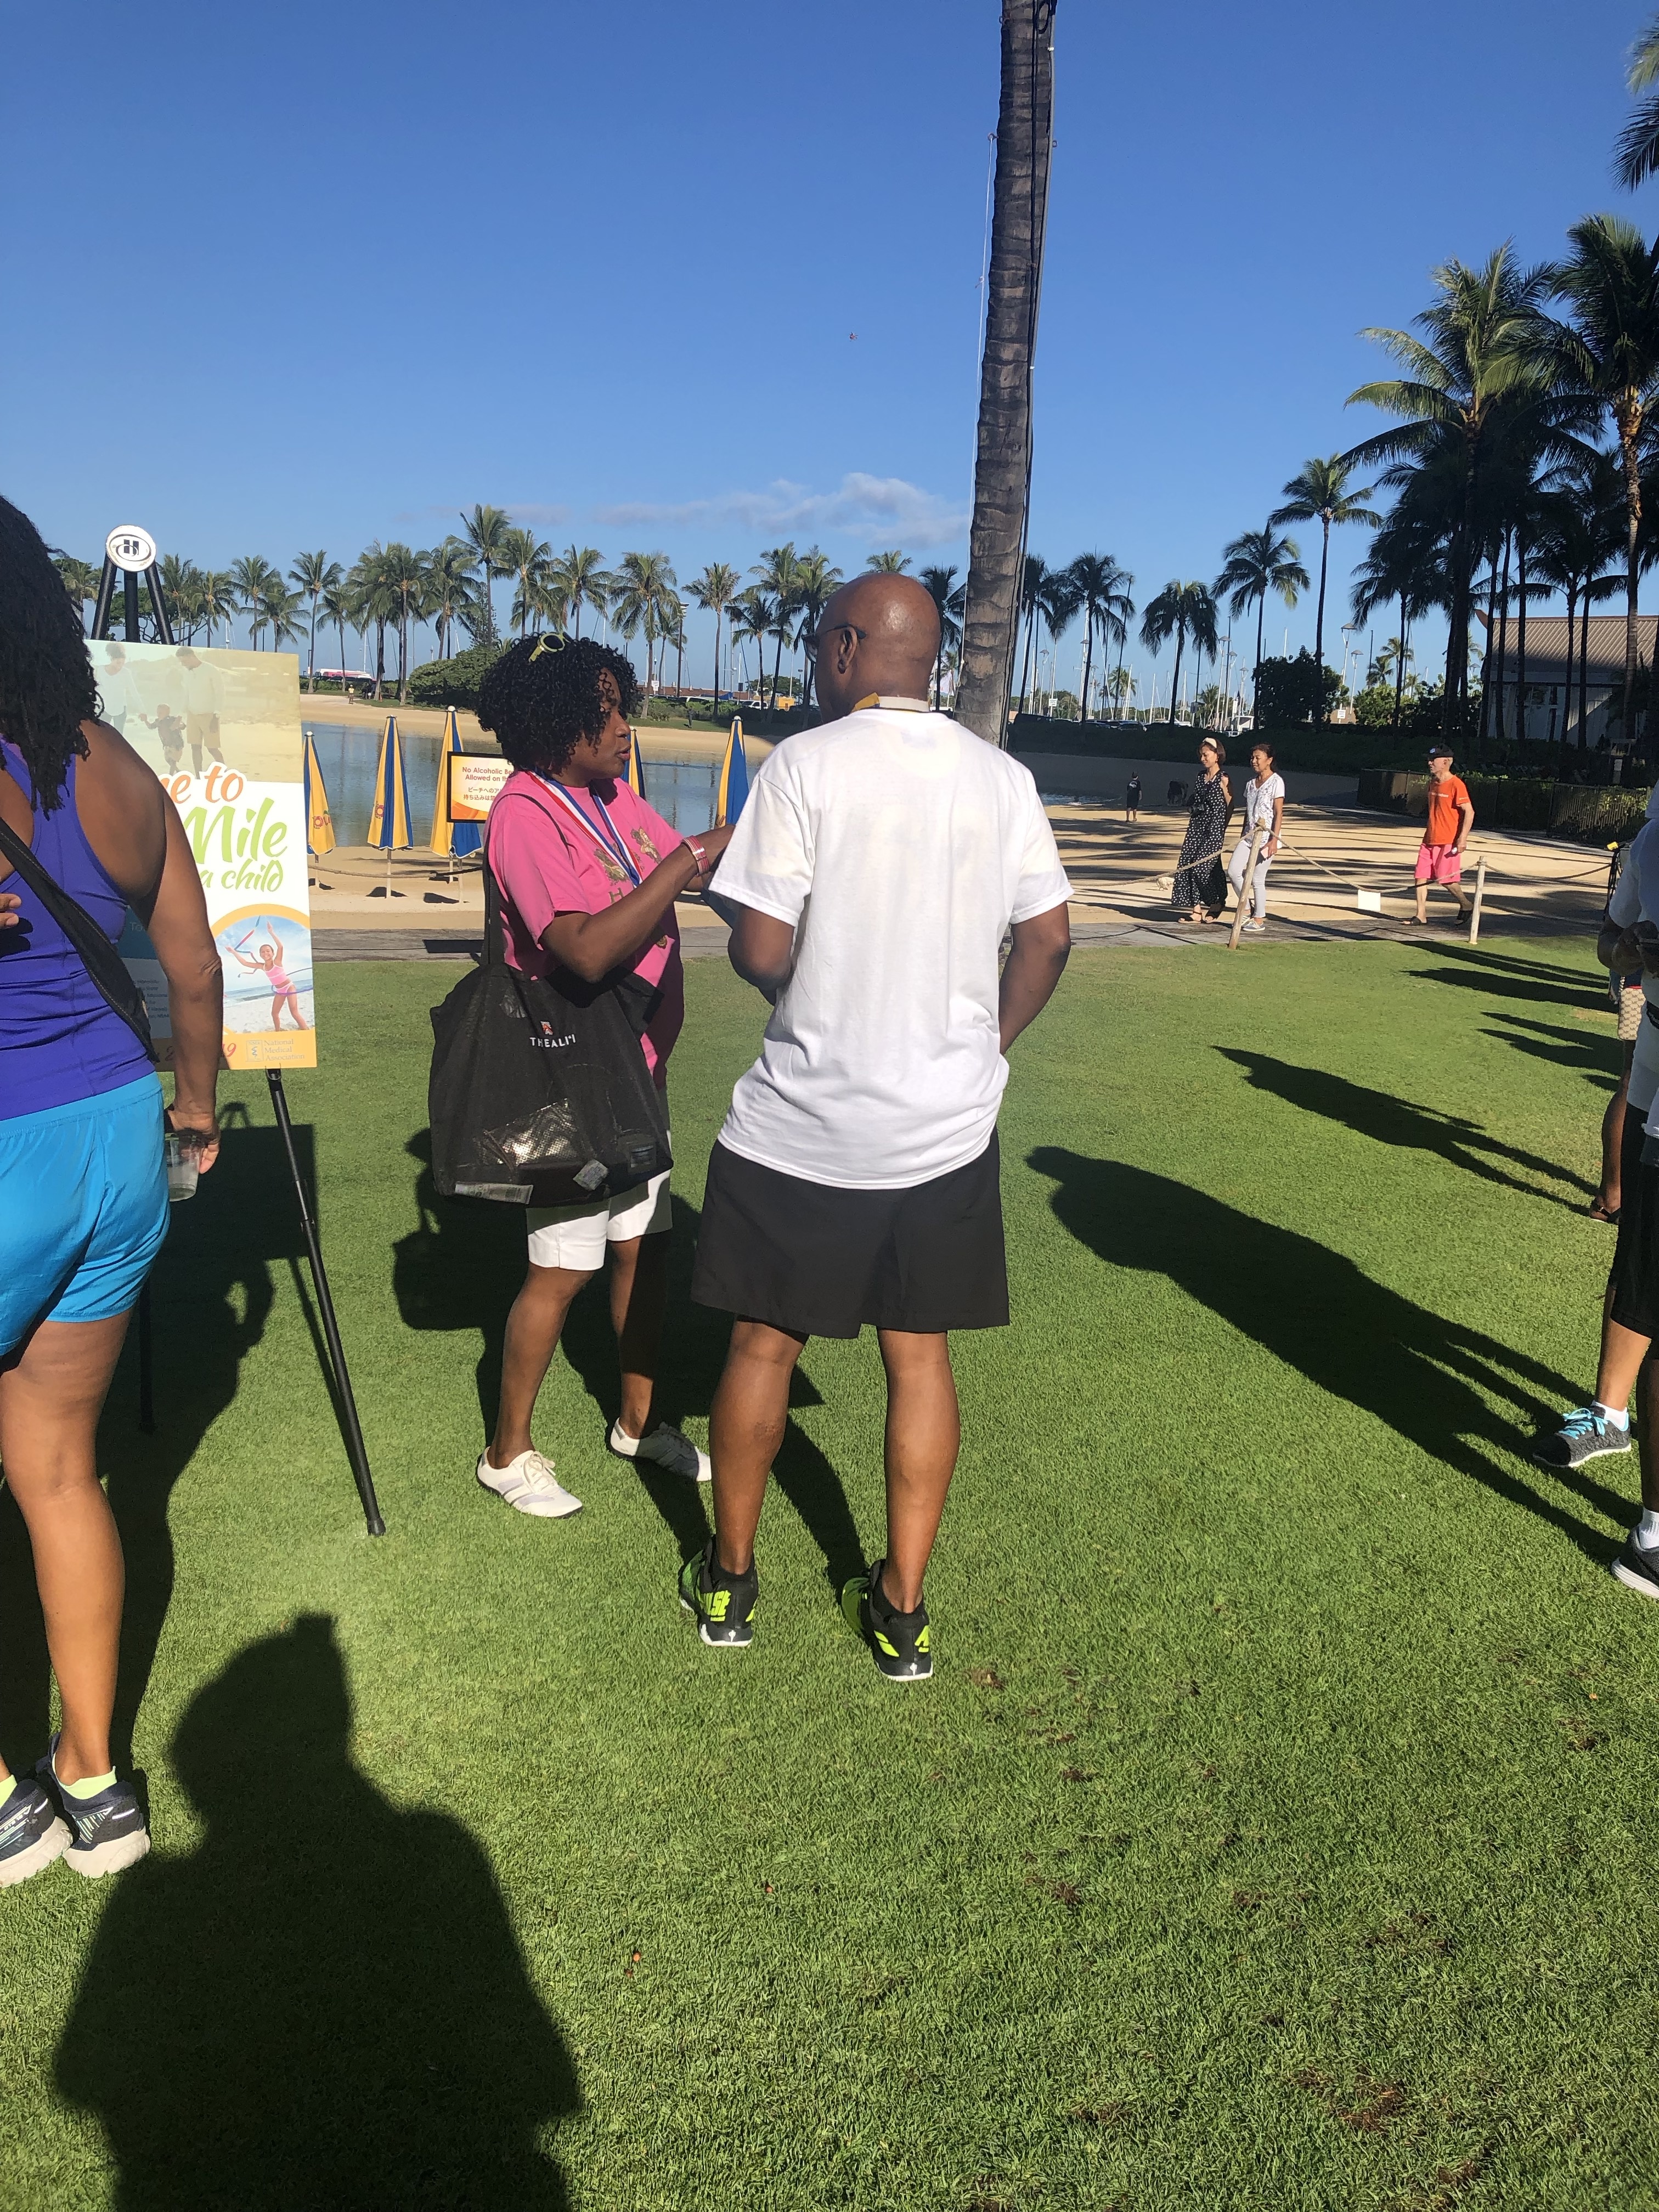 NMA and ANMA walk a mile with a child in HonoluluJuly 27, 2019